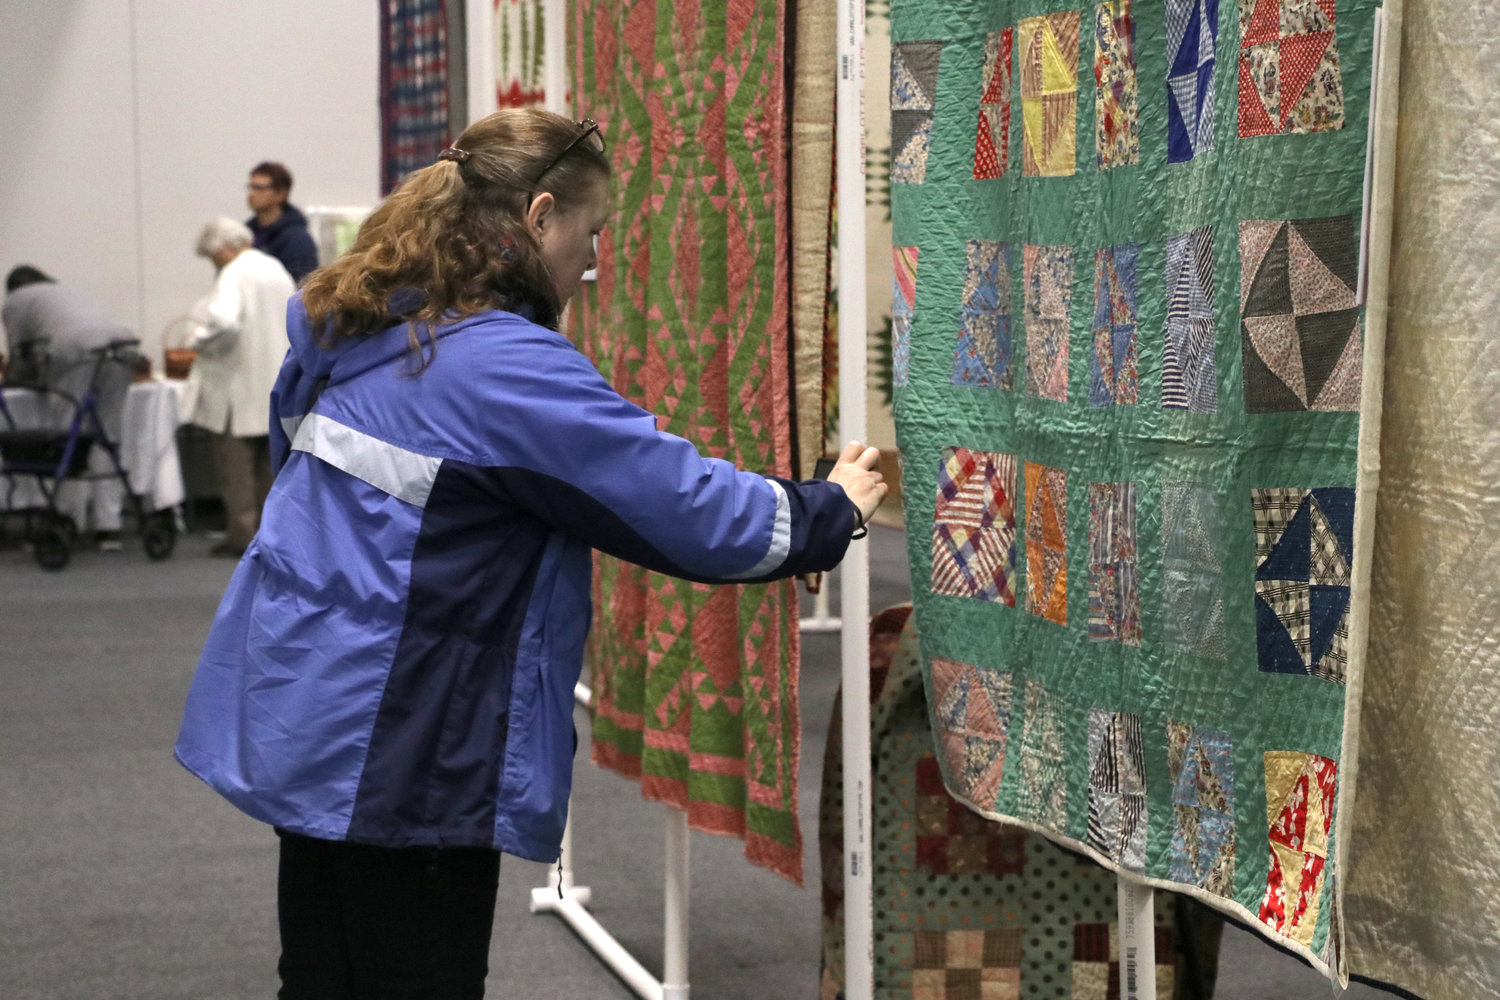 Quilters enjoyed studying the work of others at the event.